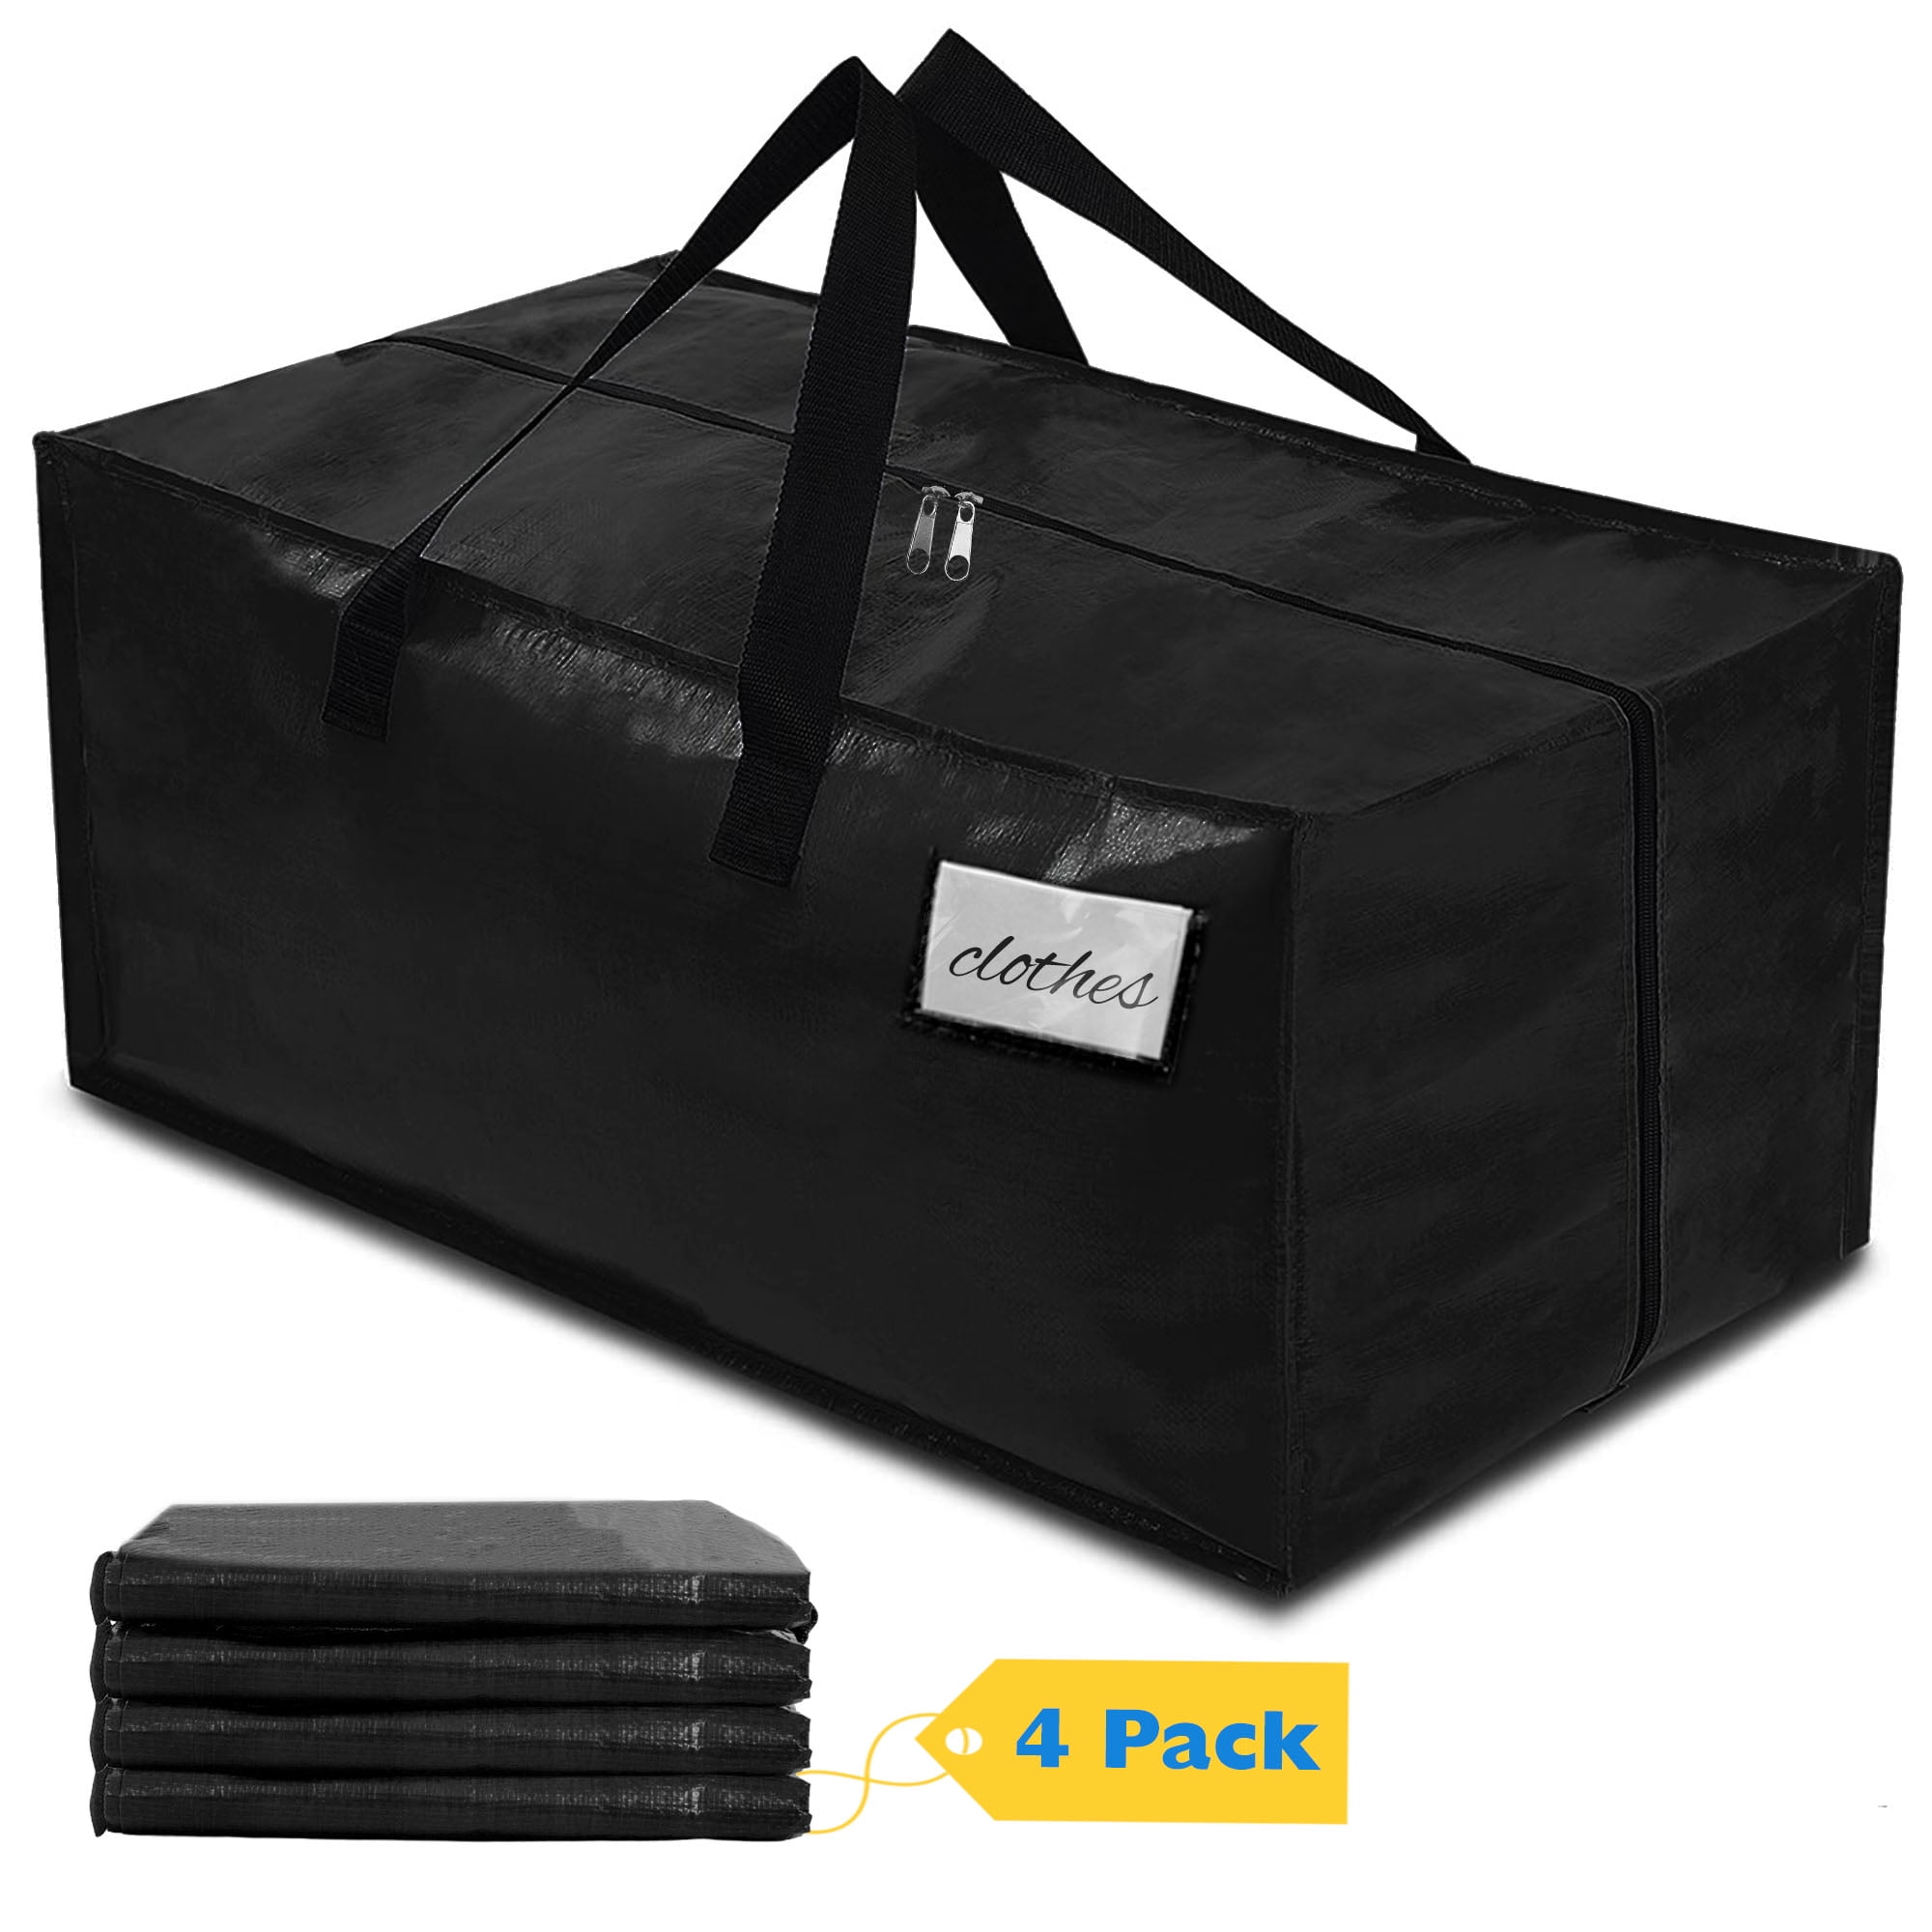 VENO 4 Pack Moving Bags and Large Christmas Storage Bins with lids. Packing  Supplies for College. Alternative to Moving Boxes. Space Saving Foldable